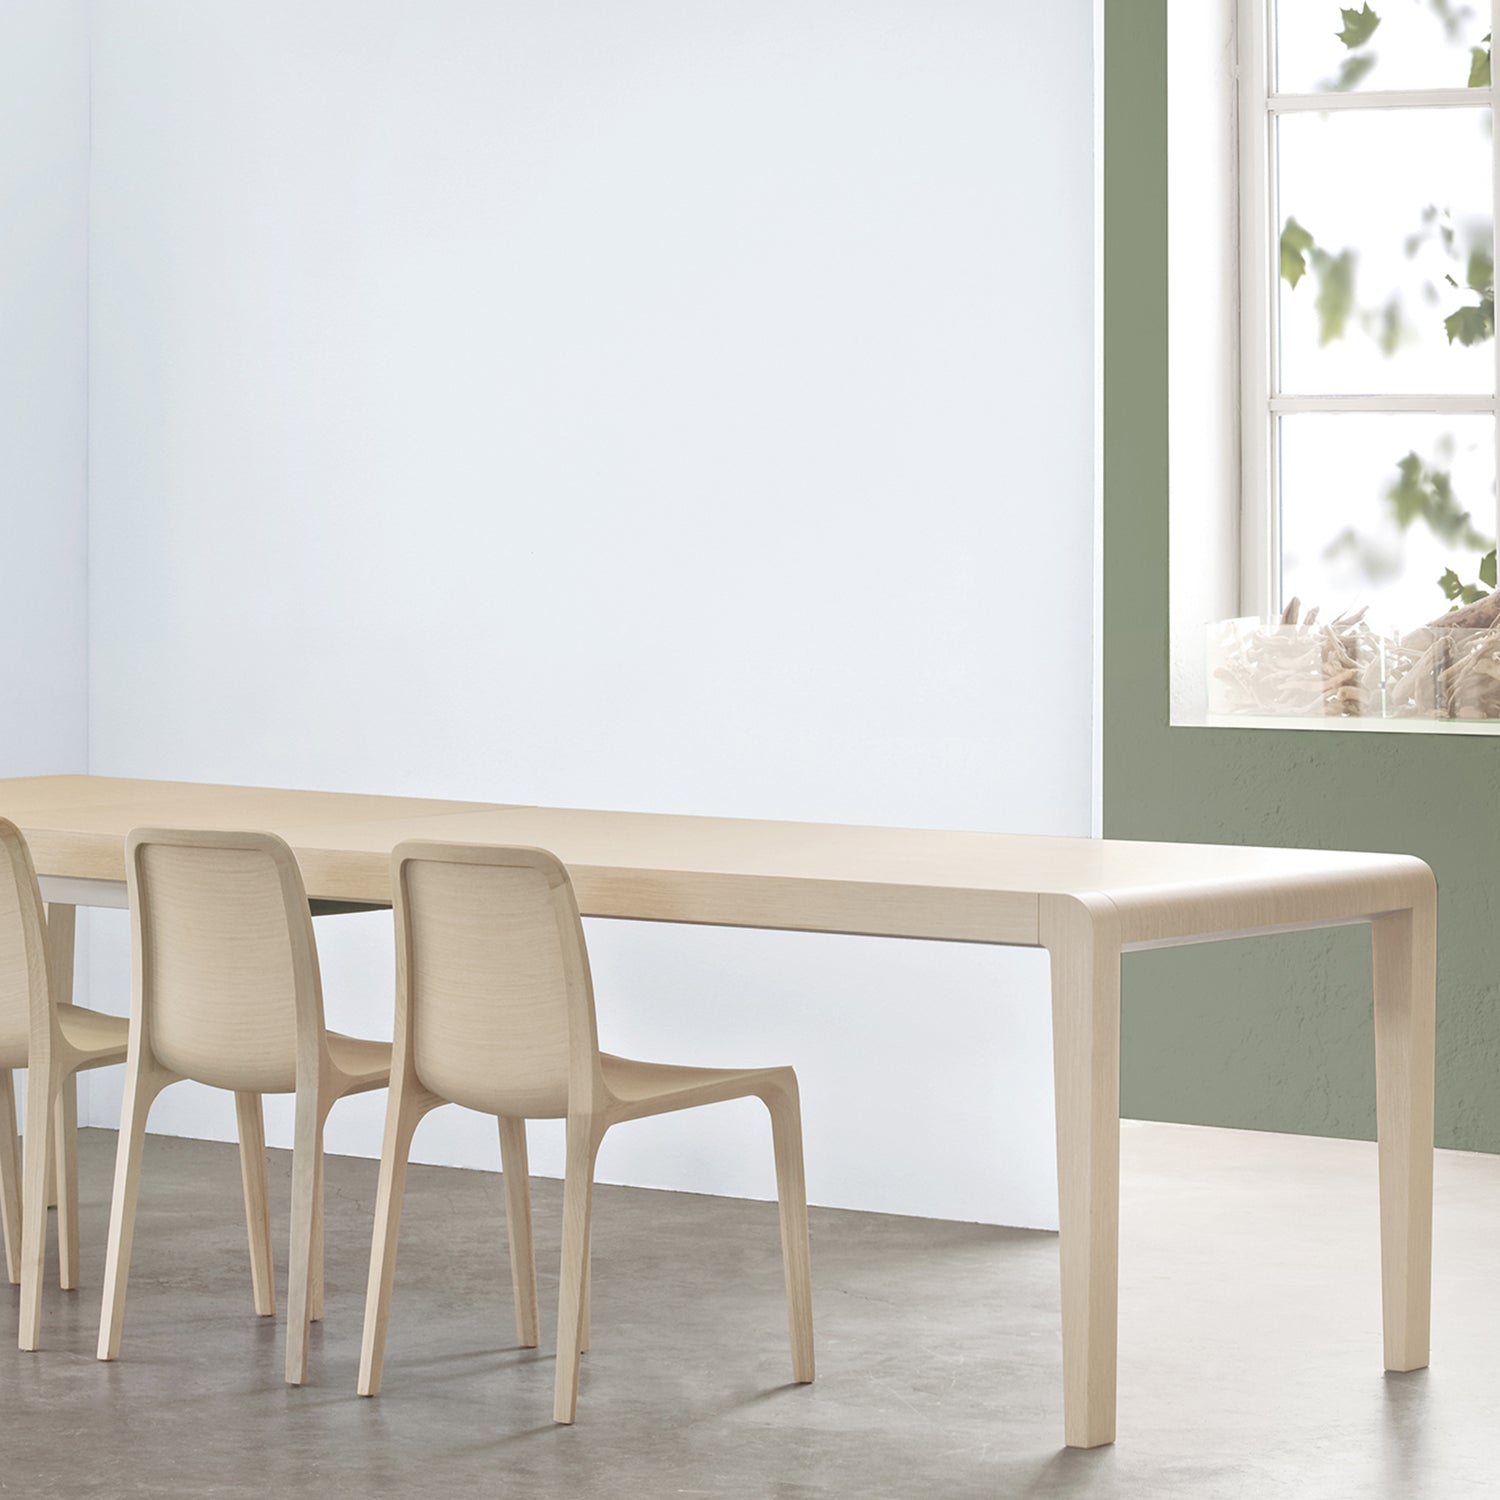 Pedrali Exteso Dining Table in bleached oak